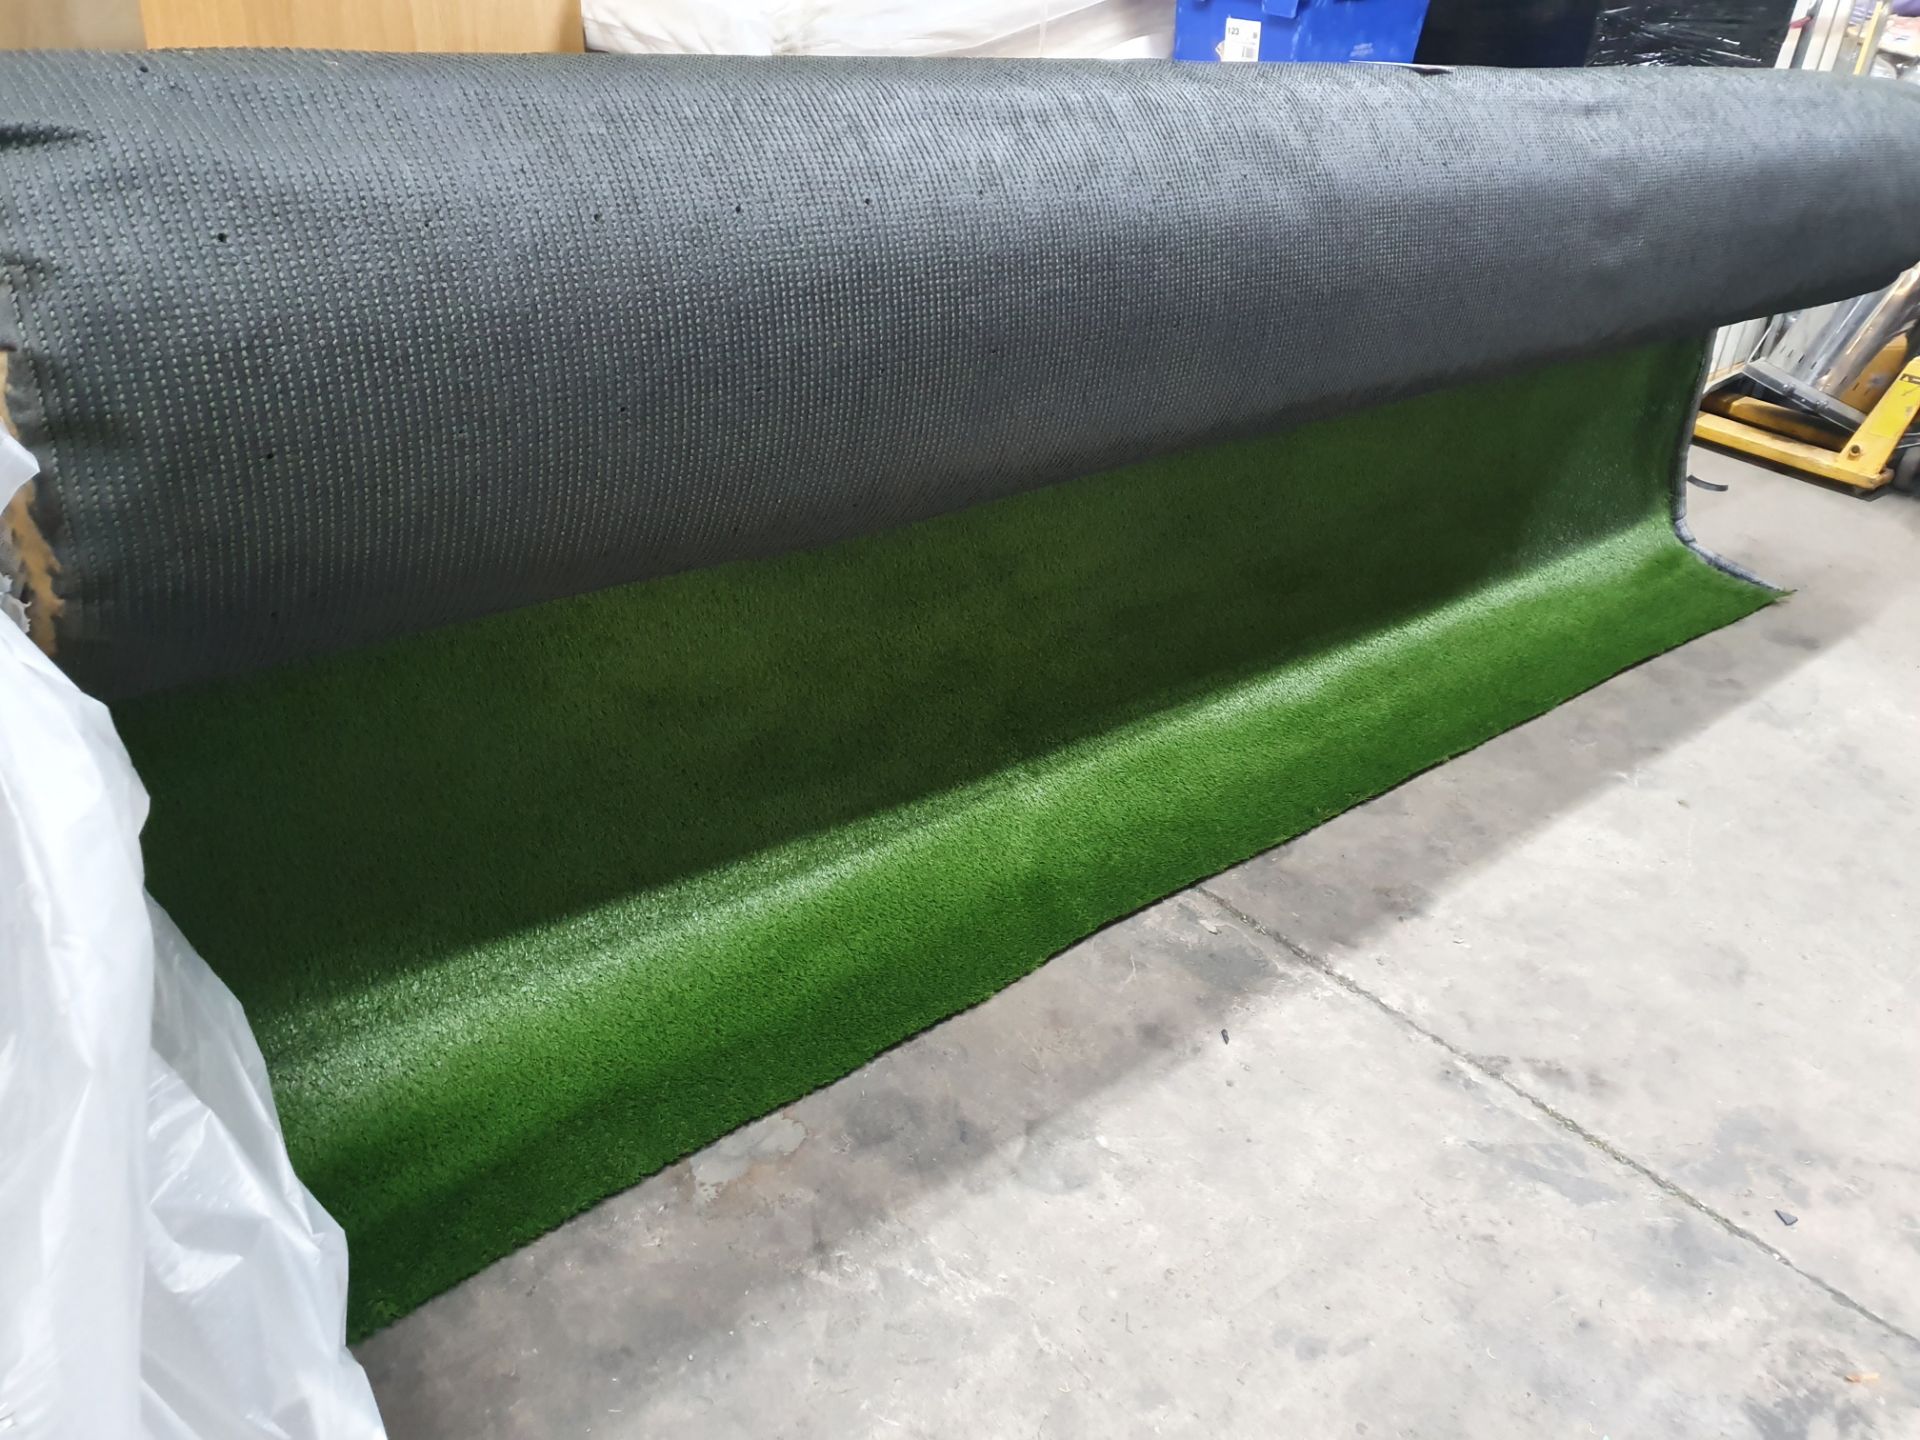 Roll of Green Artifical Grass | Approximate size: 4m x 25m